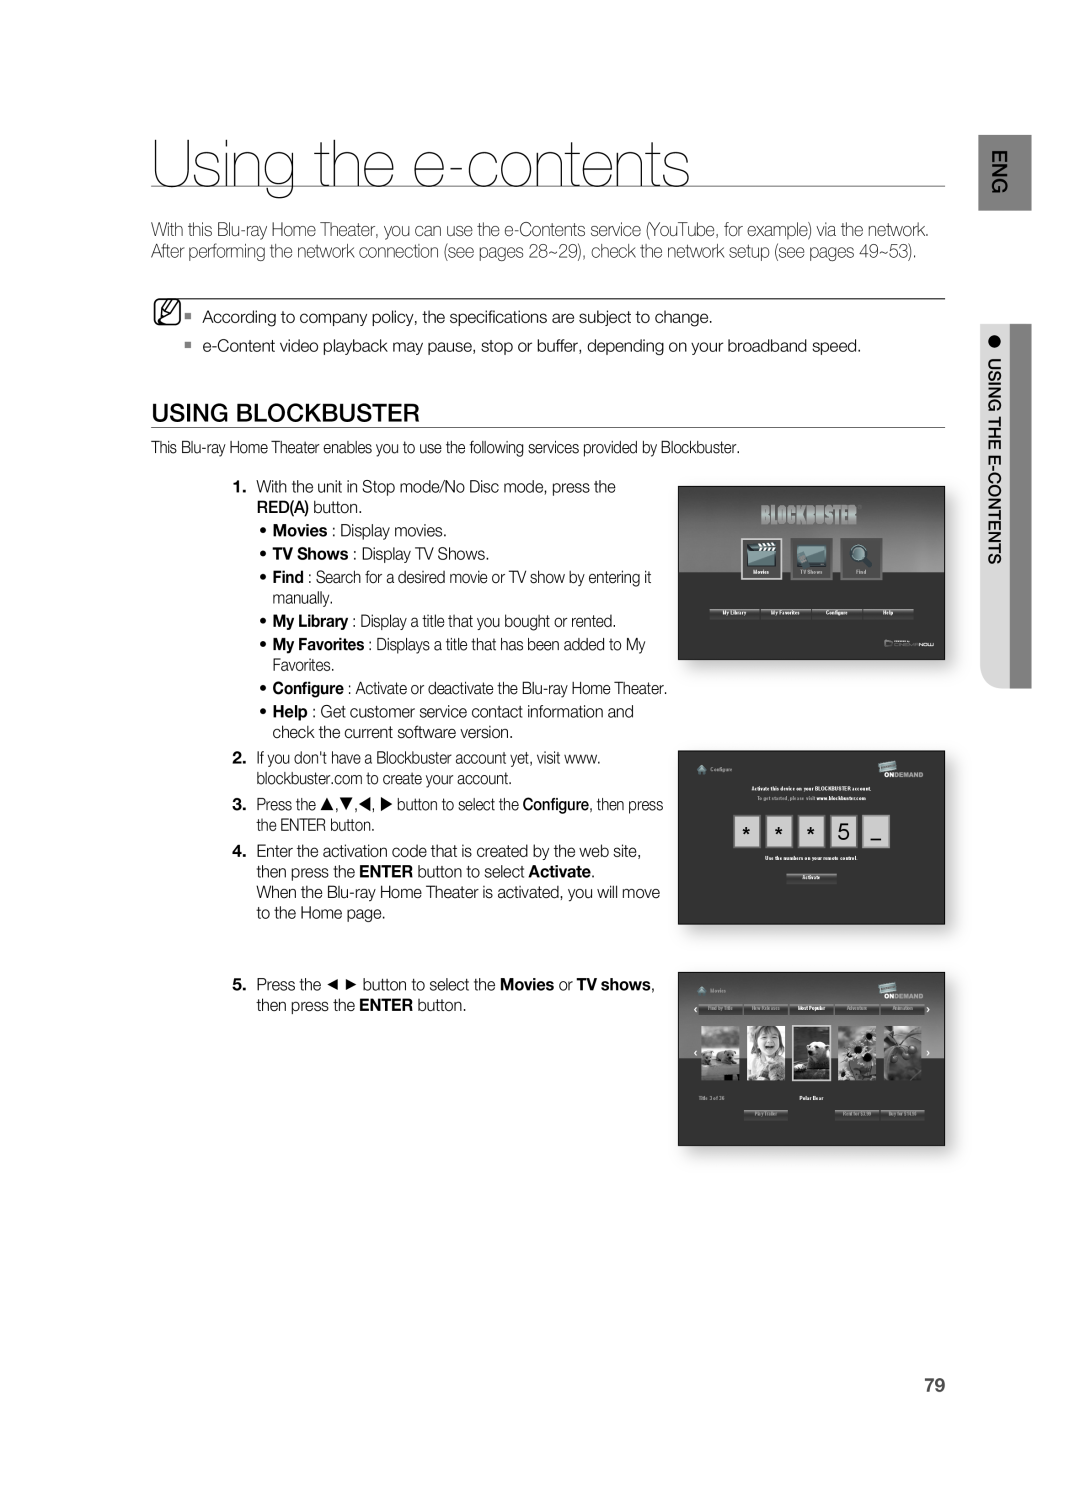 Samsung HT-BD8200 user manual Using the e-contents, Using Blockbuster, TV Shows Display TV Shows, manually 